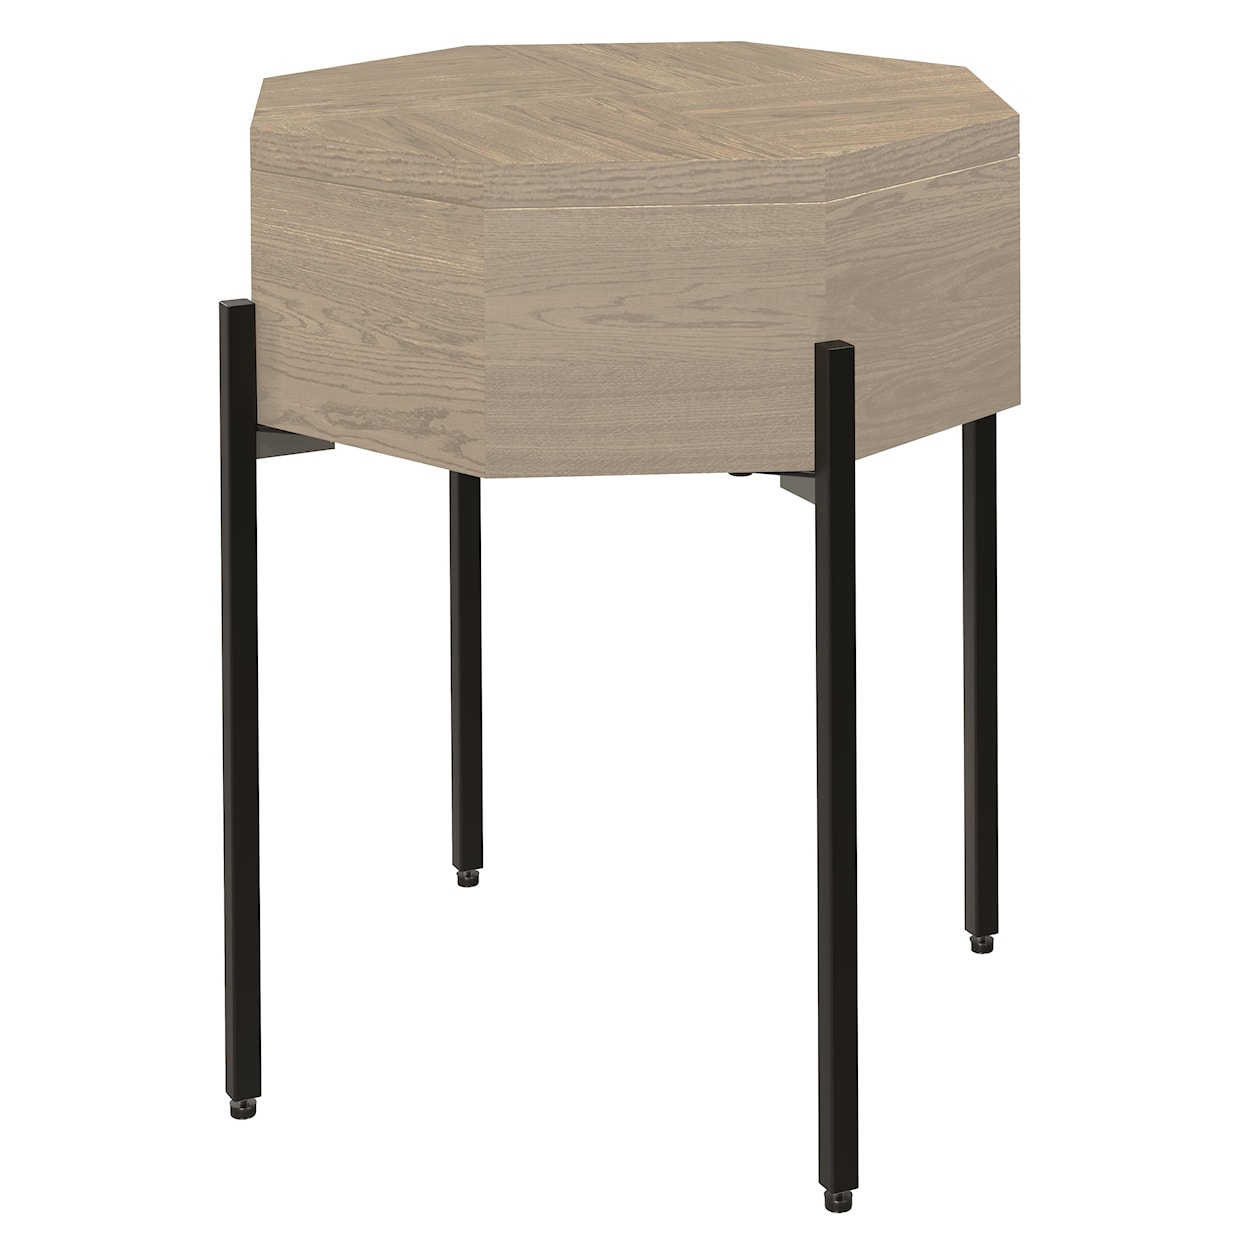 Hekman Mayfield End Table